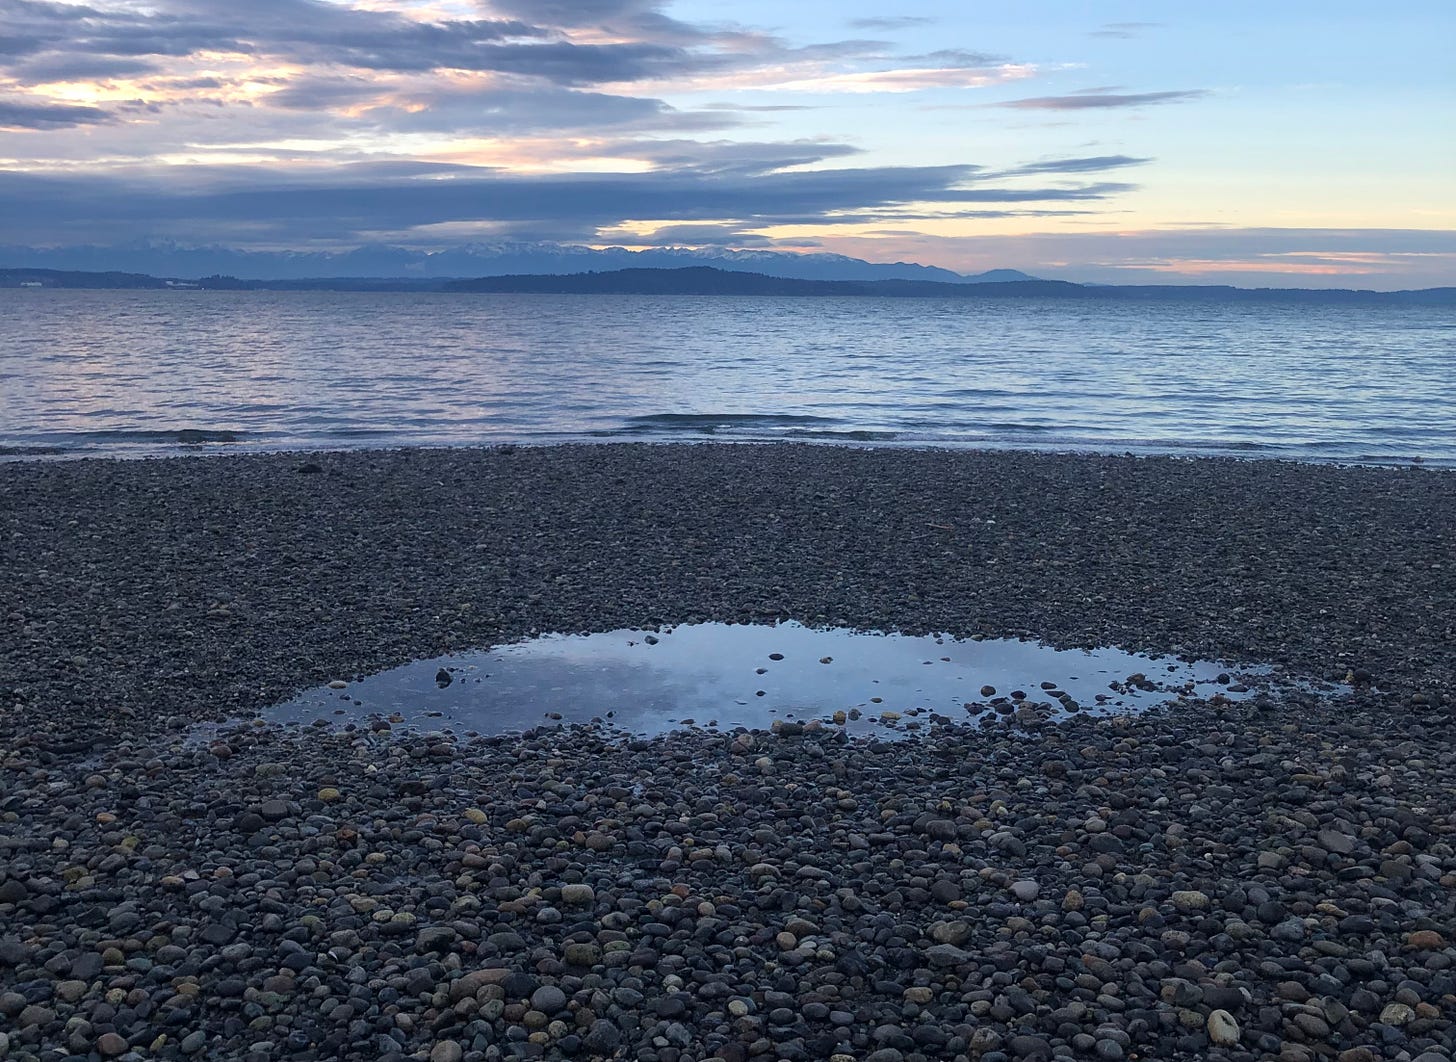 image of a rocky ocean beach with a half-moon puddle reflecting the sky and snowy mountains visible in the beyond.